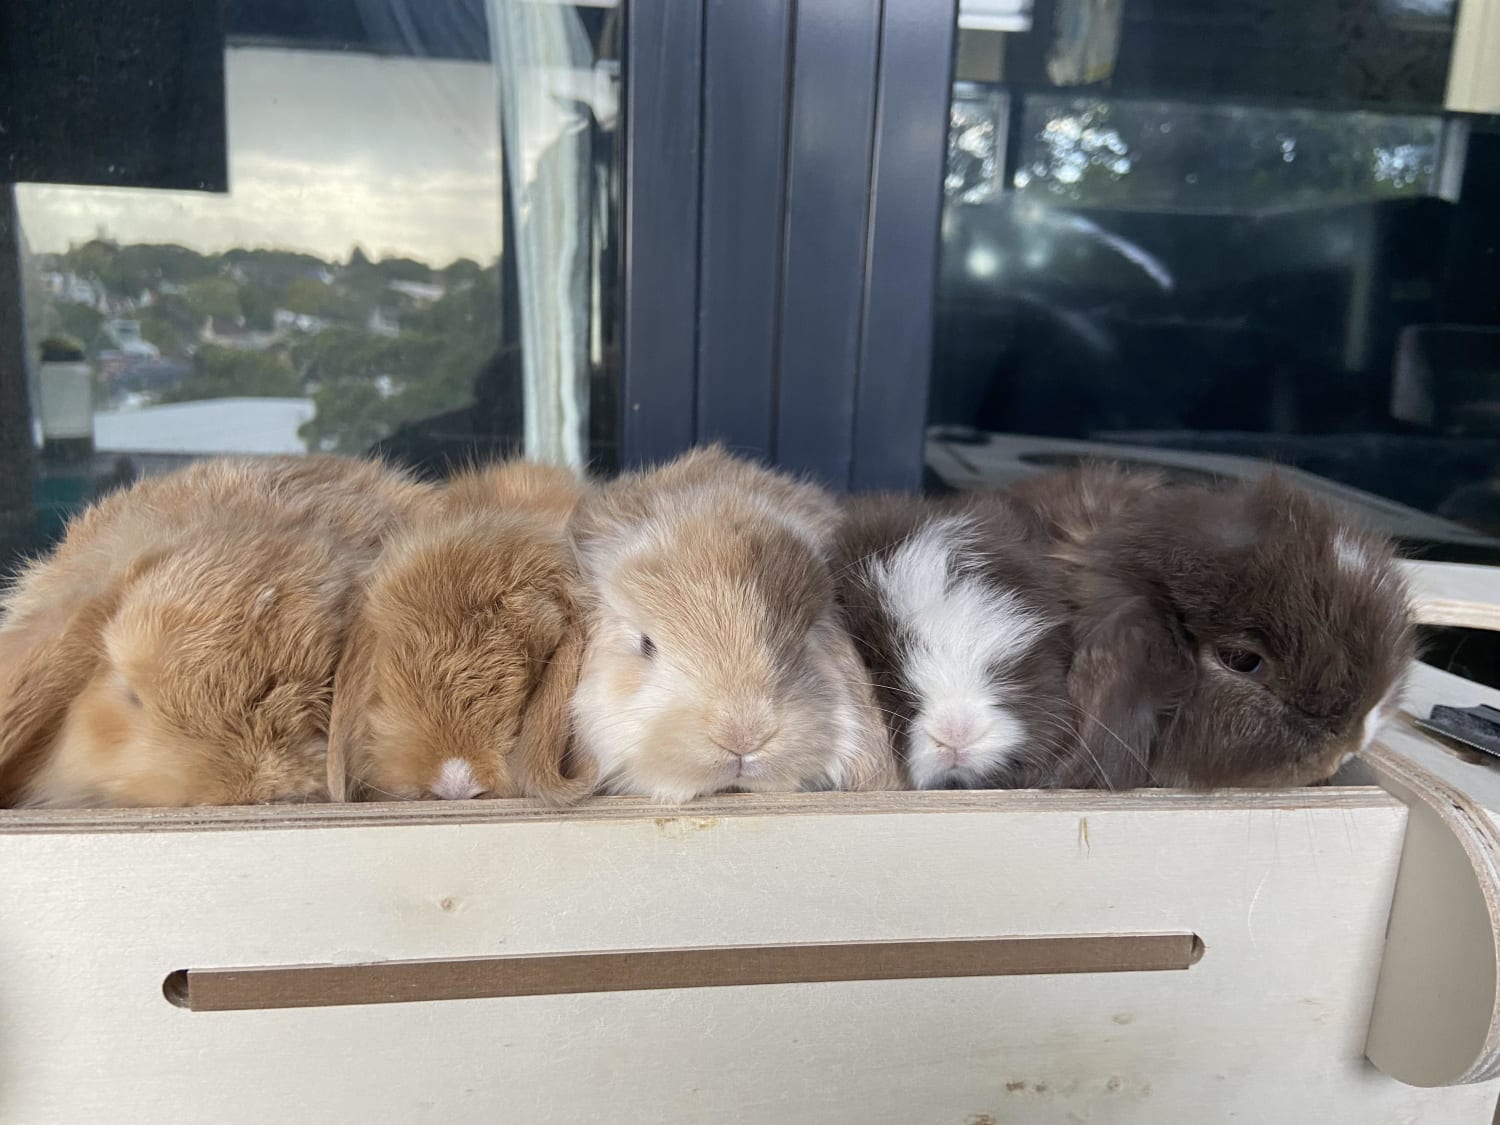 jam, biscuit , ???, crumpet and muffin help me name the middle !